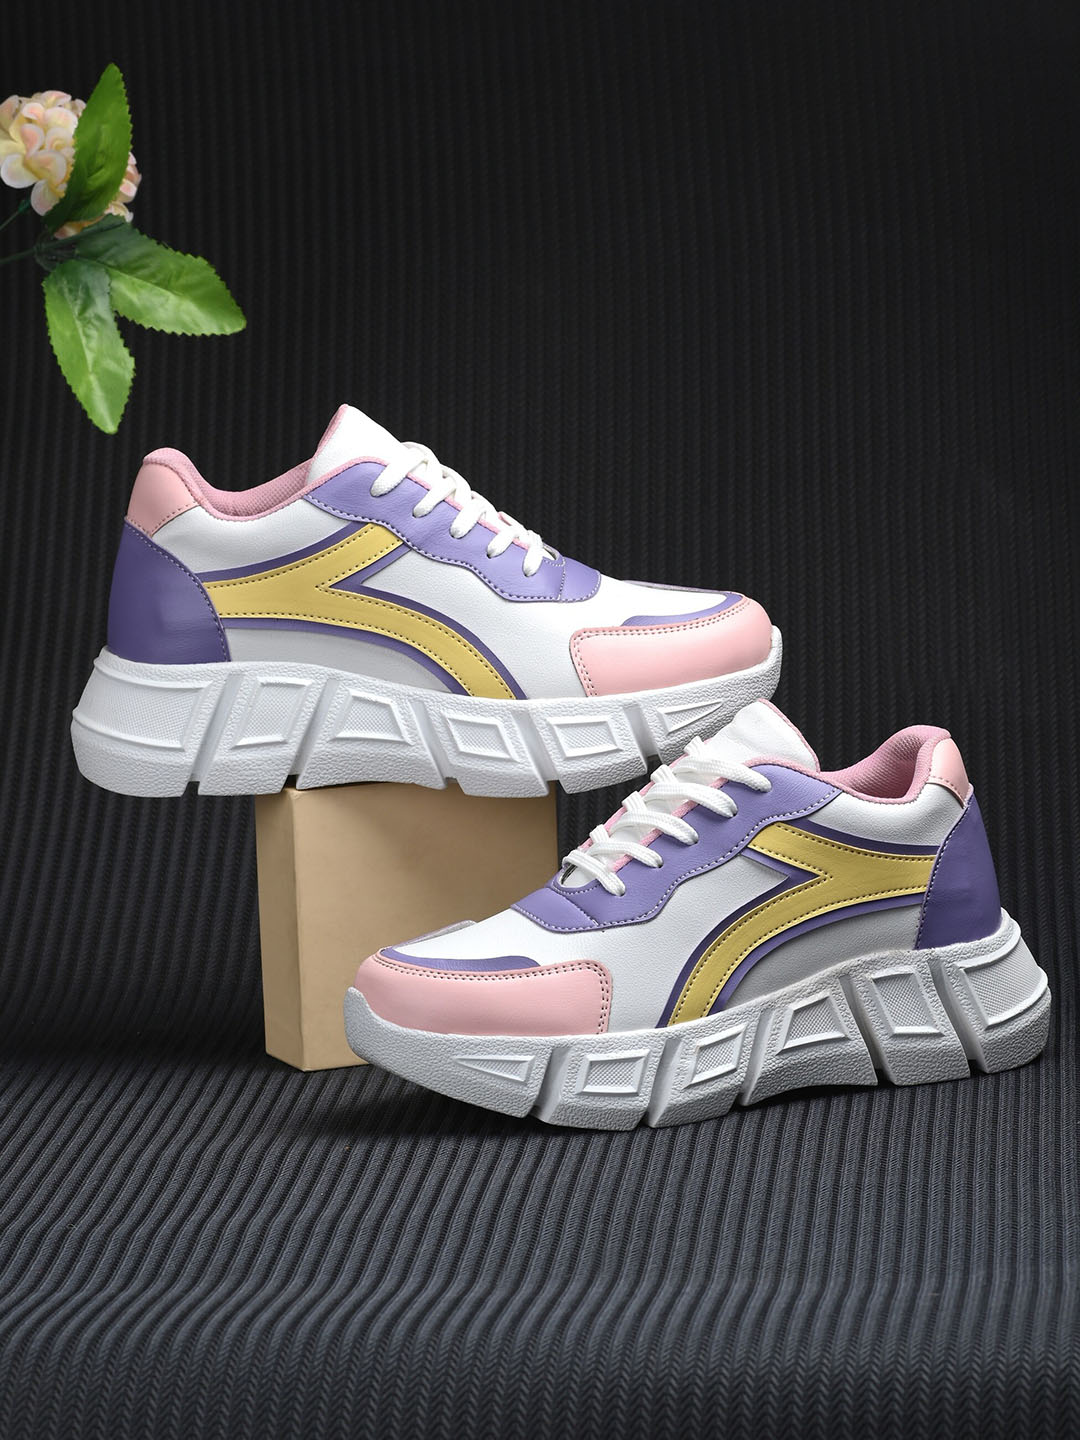 Roadster Women White & Purple Colourblocked Casual Synthetic Leather Sneakers